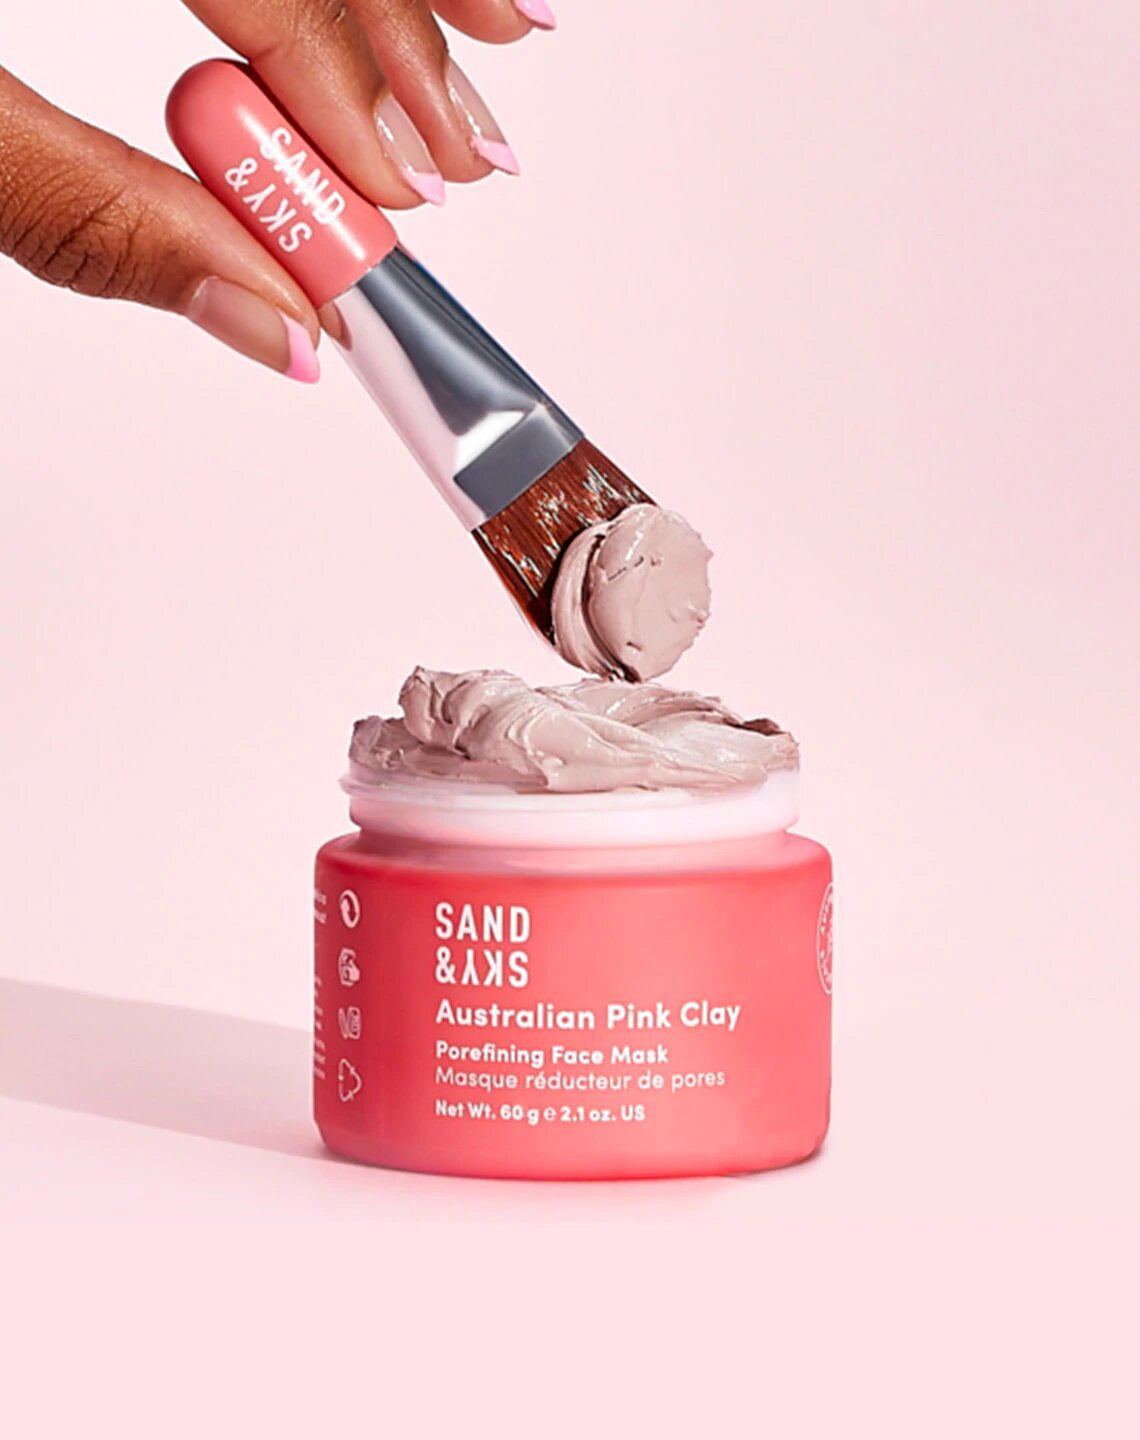 Sand & Sky Australian Pink Clay Pore fining Face Mask